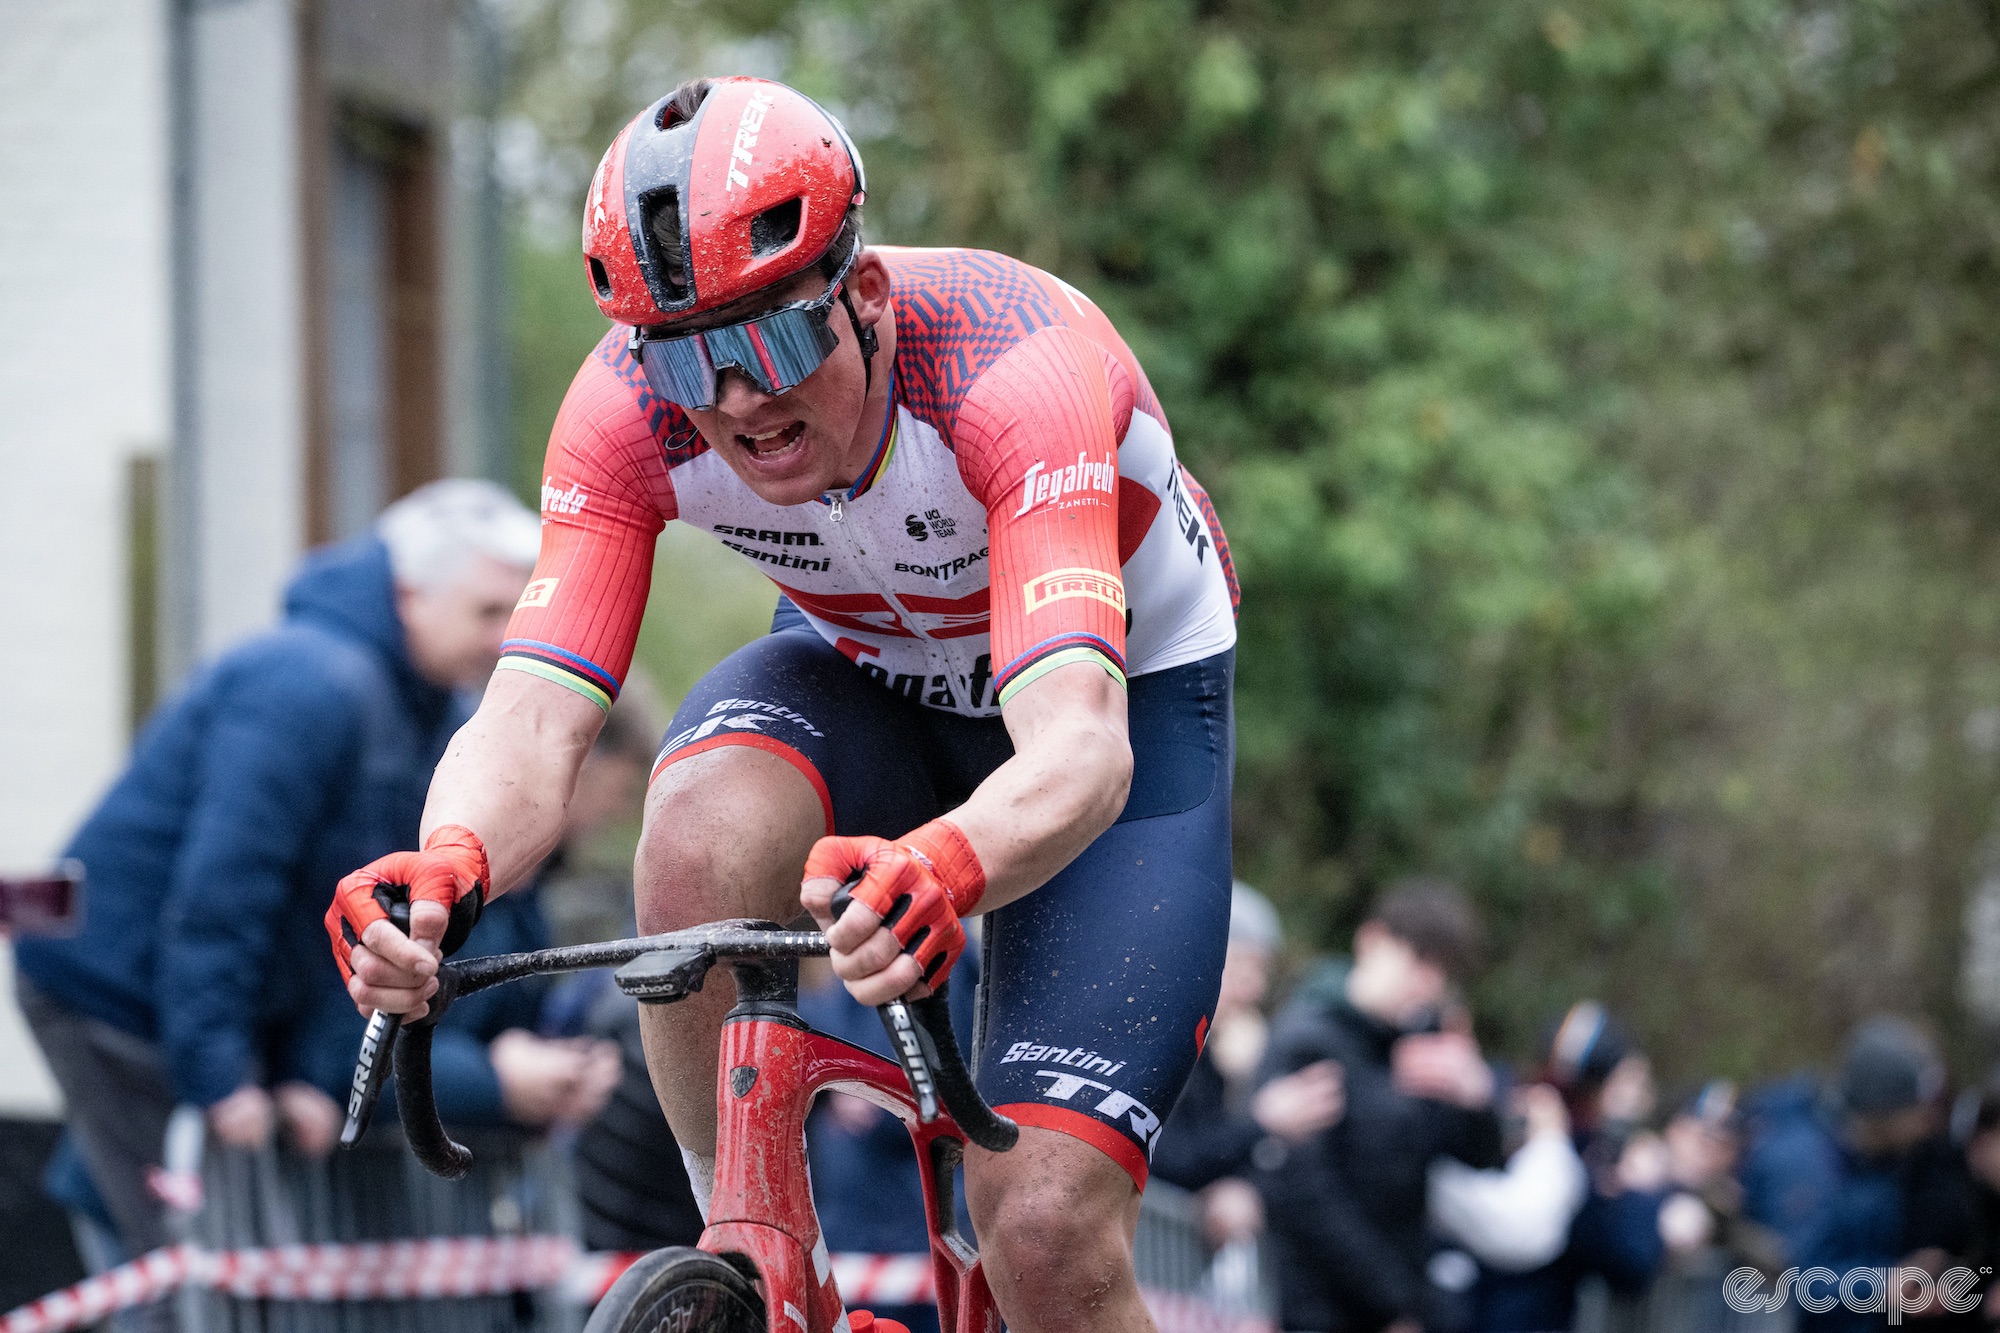 Mads Pedersen at the Tour of Flanders.